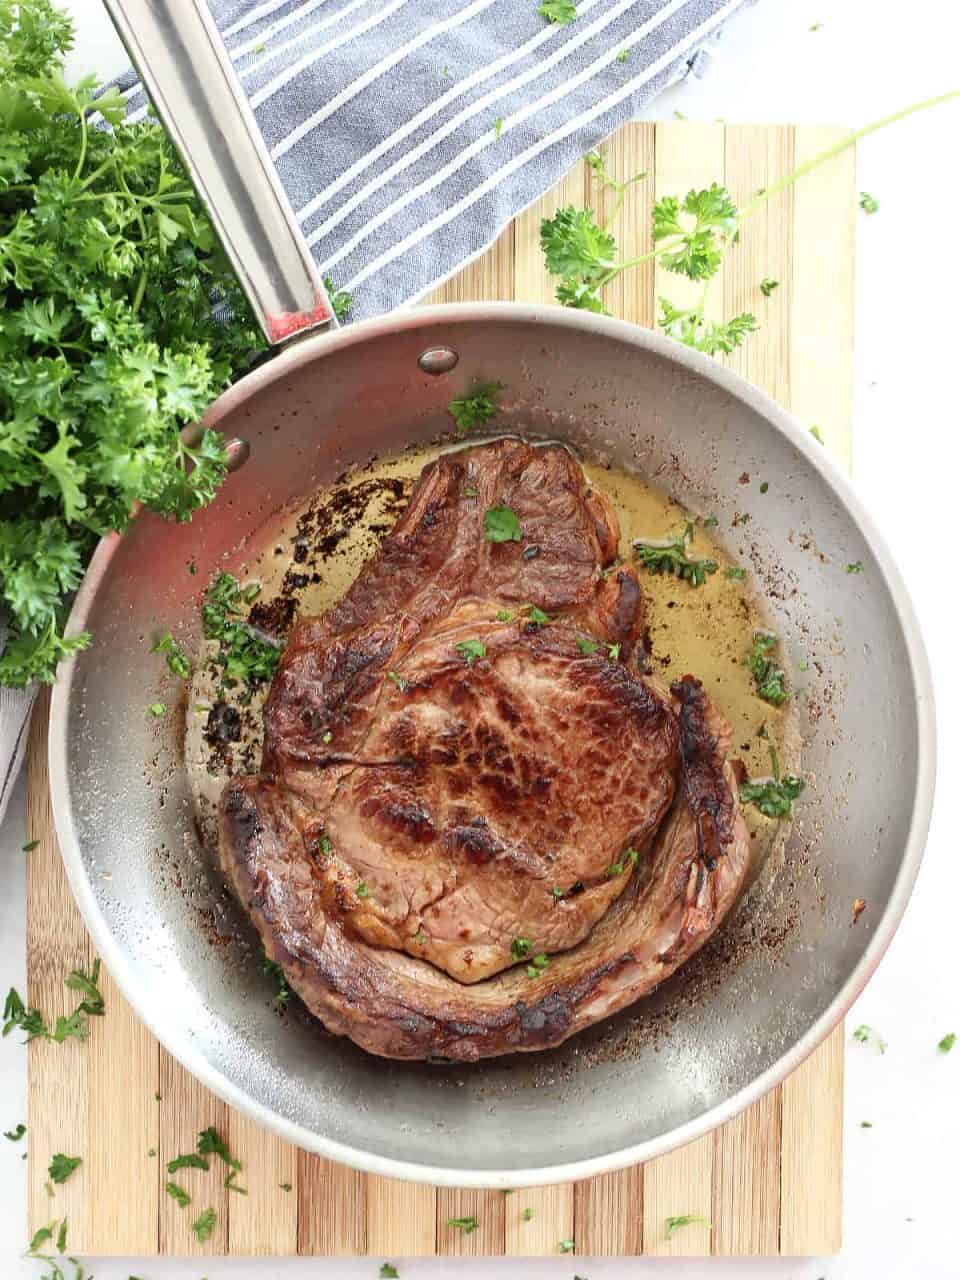 Beer marinated steak in a metal skillet on a wooden chopping board next to a bunch of fresh parsley.